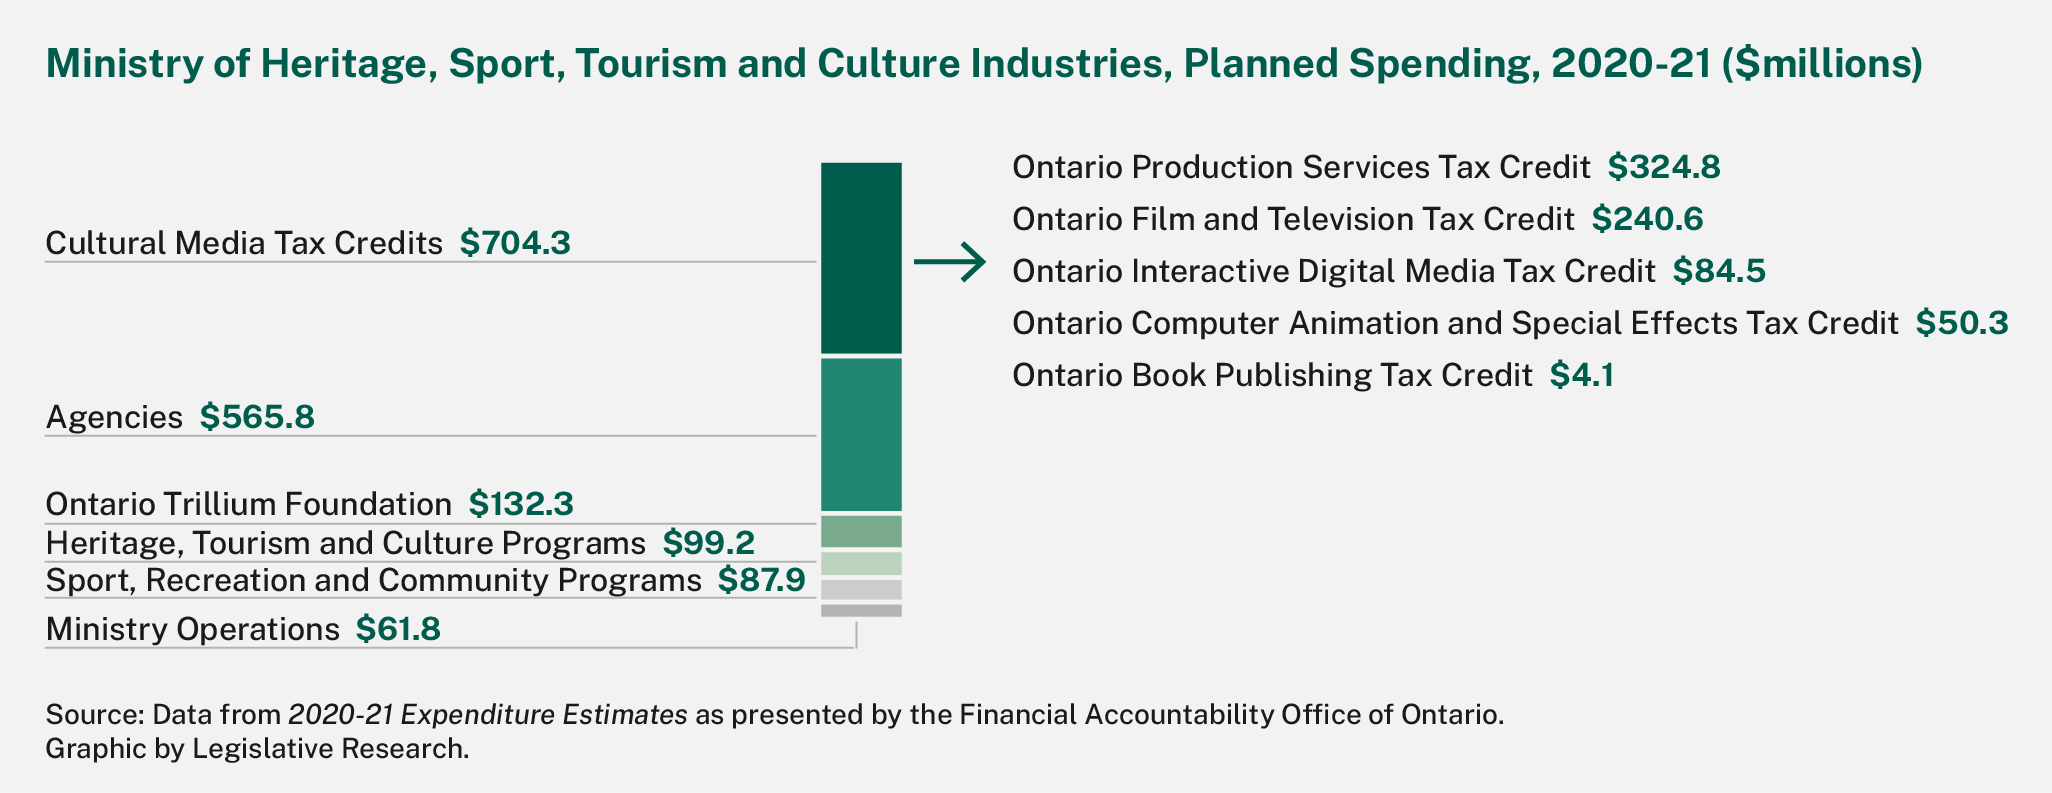 This figure contains a breakdown of planned spending by the Ministry of Heritage, Sport, Tourism and Culture Industries according to the 2020-21 Expenditure Estimates (as presented by the Financial Accountability Office of Ontario).  It shows the highest portion of planned spending is for Cultural Media Tax Credits ($704.3 million), followed by: Agencies ($565.8 million); Ontario Trillium Foundation ($132.3 million); Heritage, Tourism and Culture Programs ($99.2 million); Sport, Recreation and Community Programs ($87.9 million); and, Ministry Operations ($61.8 million).